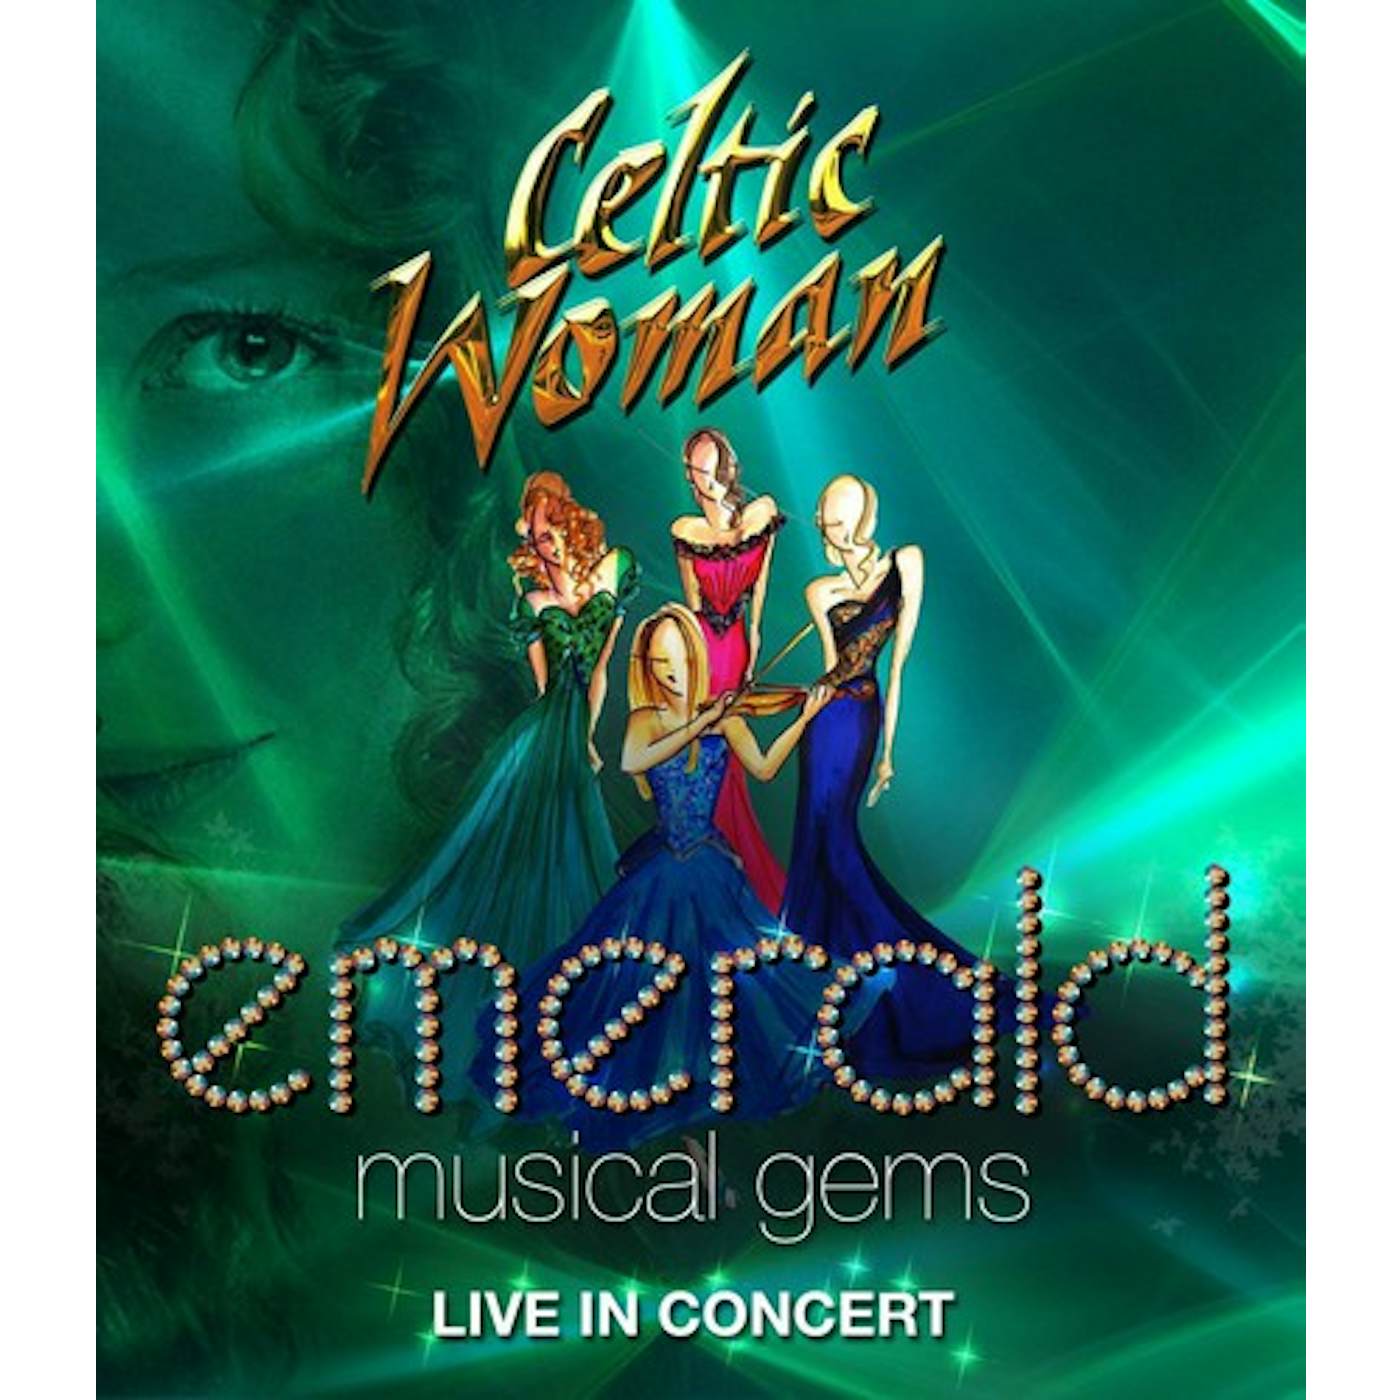 Celtic Woman EMERALD: MUSICAL GEMS - LIVE IN CONCERT Blu-ray